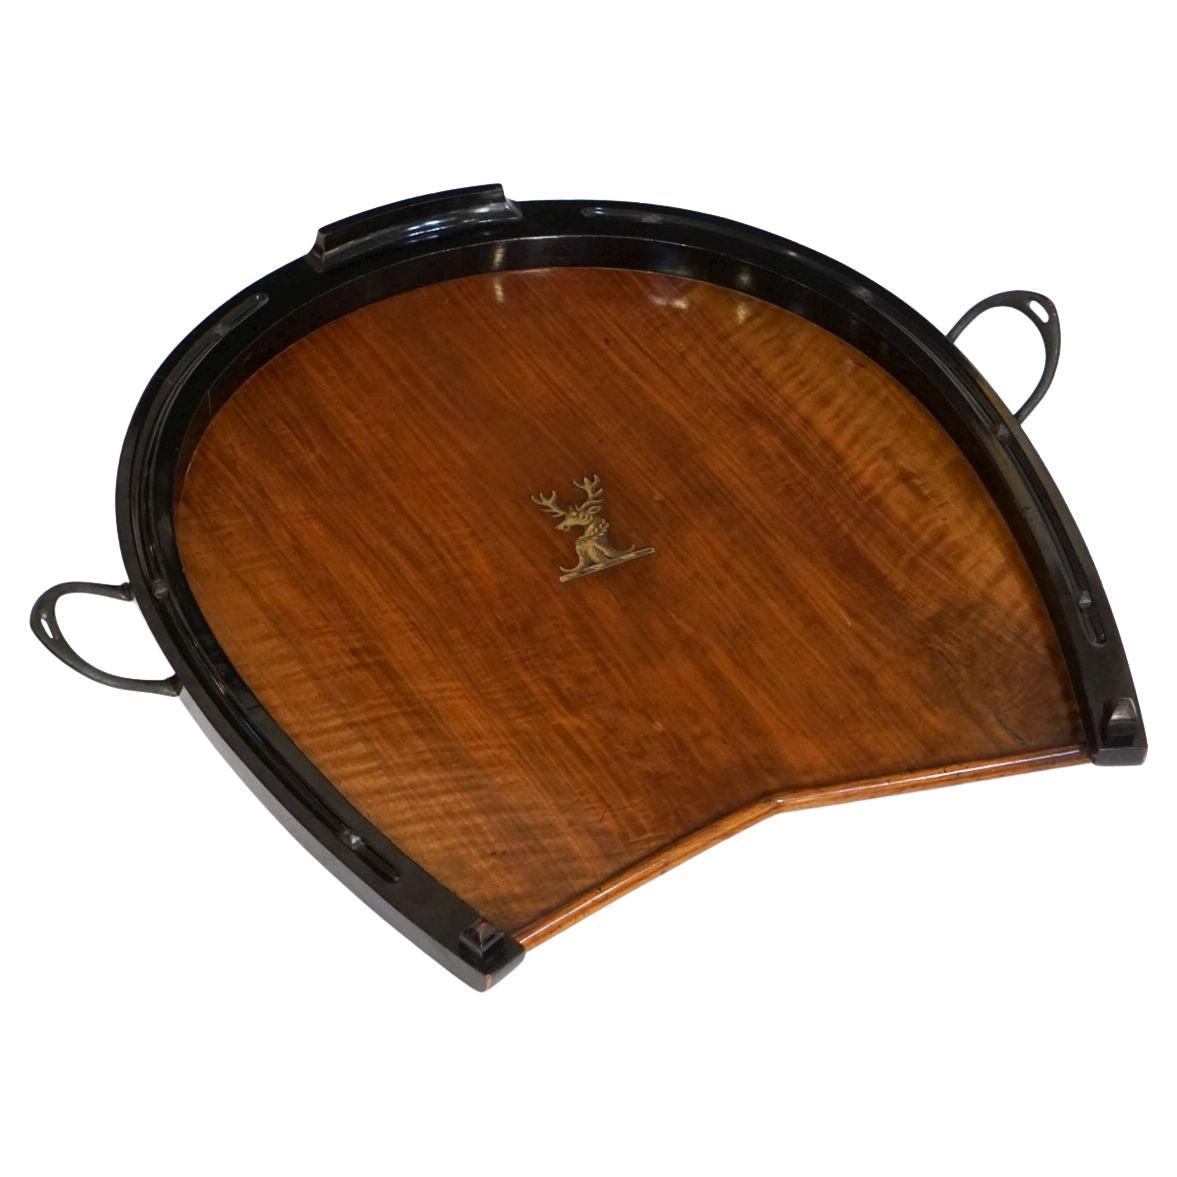 A fine English serving or display tray from the Edwardian Era featuring a horseshoe-shaped design of beautifully patinated walnut with ebonized wood accents, with two opposing handles and nail-head studs of iron around the circumference, and an